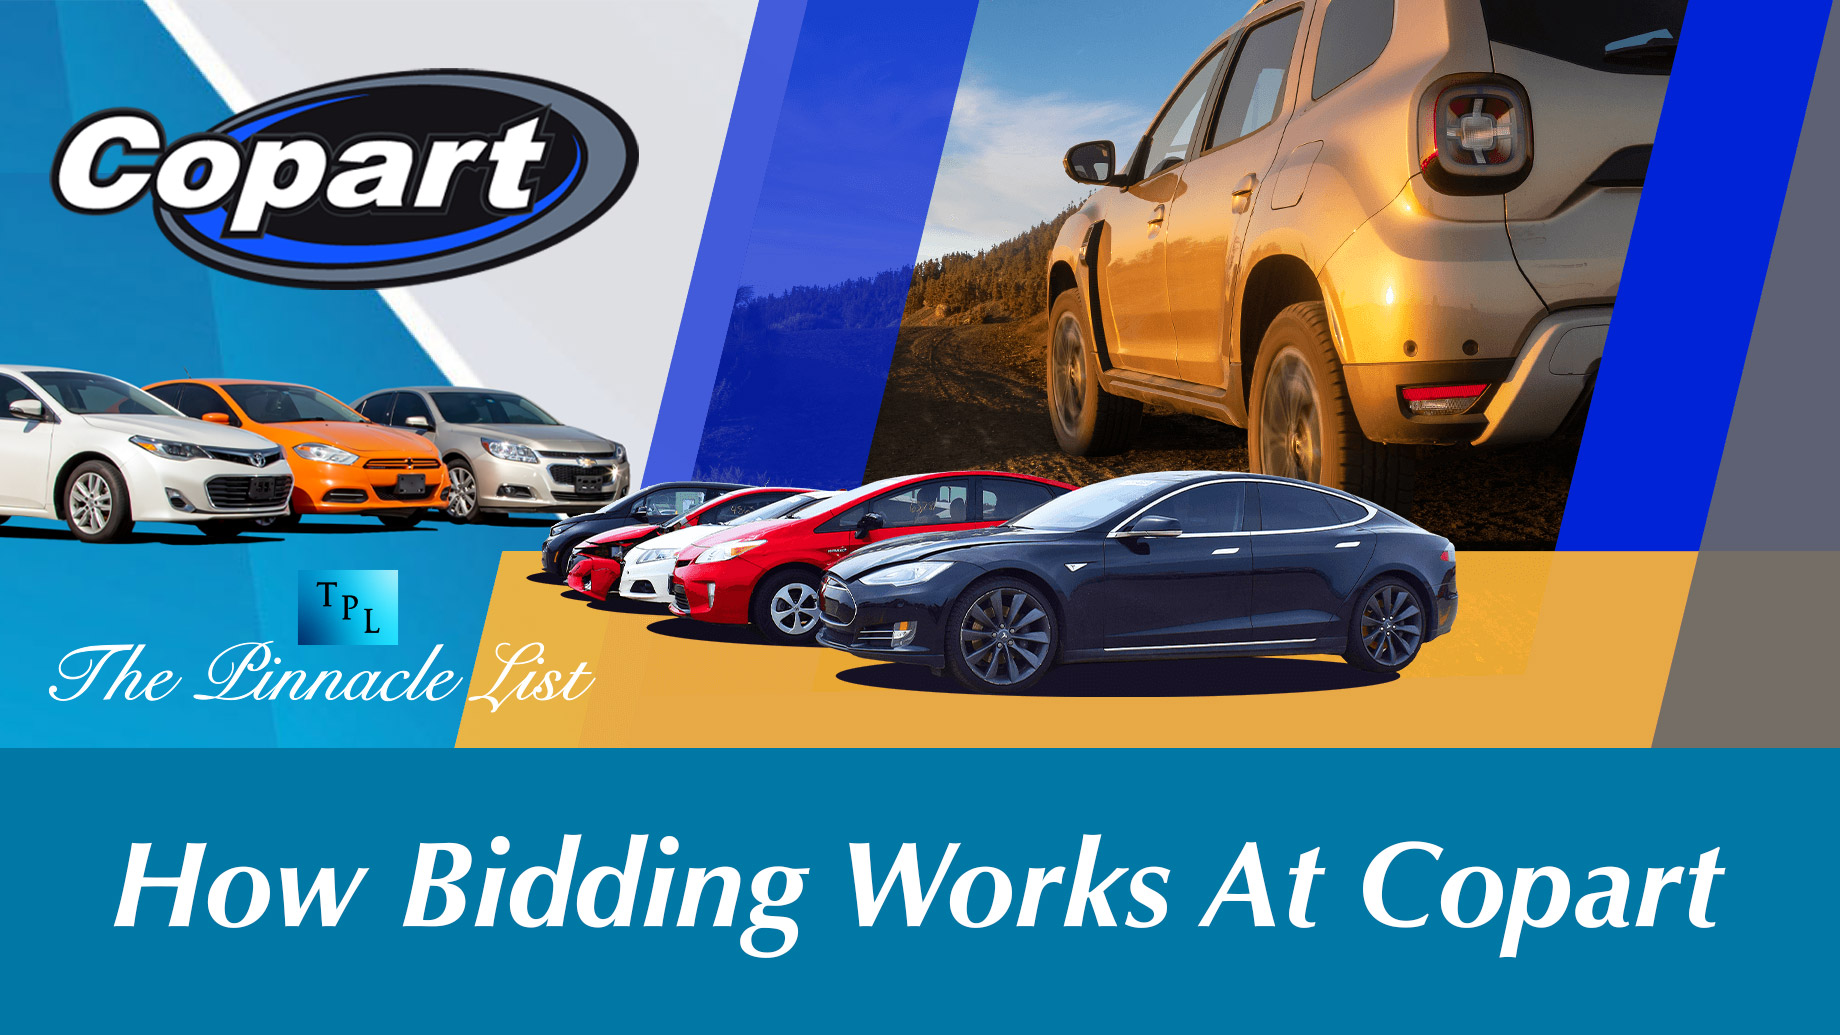 How Bidding Works At Copart – The Pinnacle List